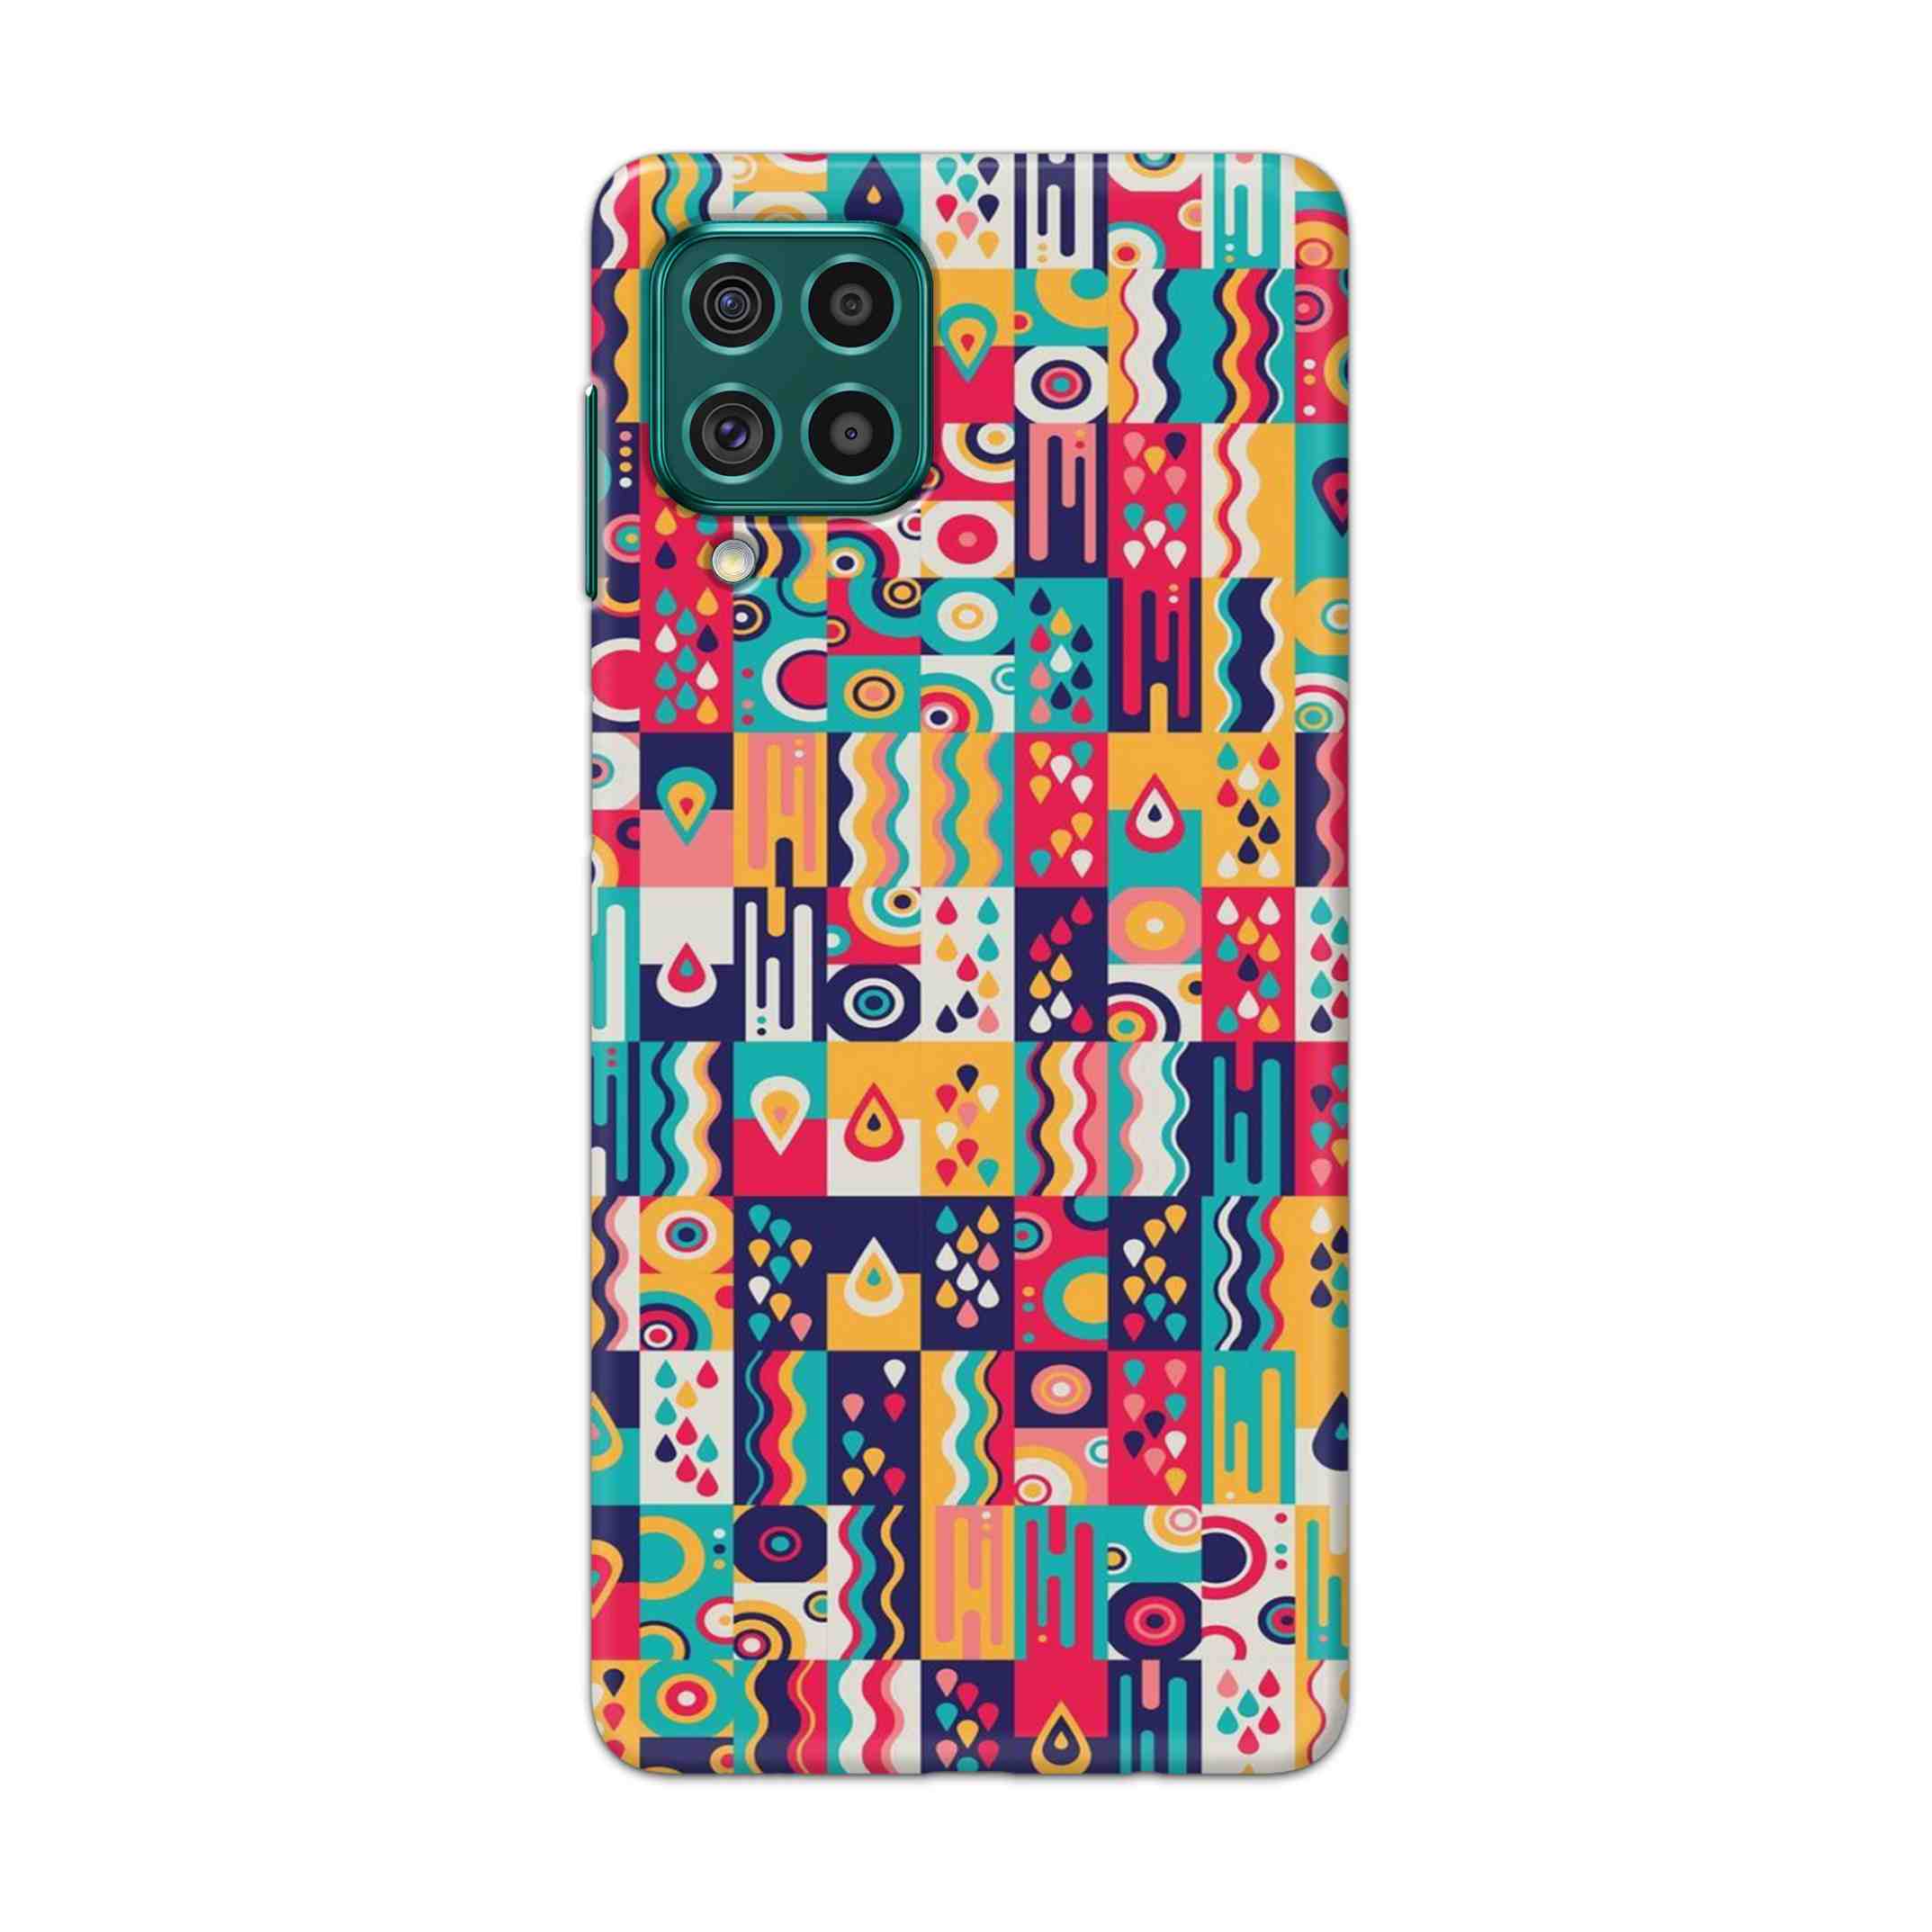 Buy Art Hard Back Mobile Phone Case Cover For Galaxy F62 Online